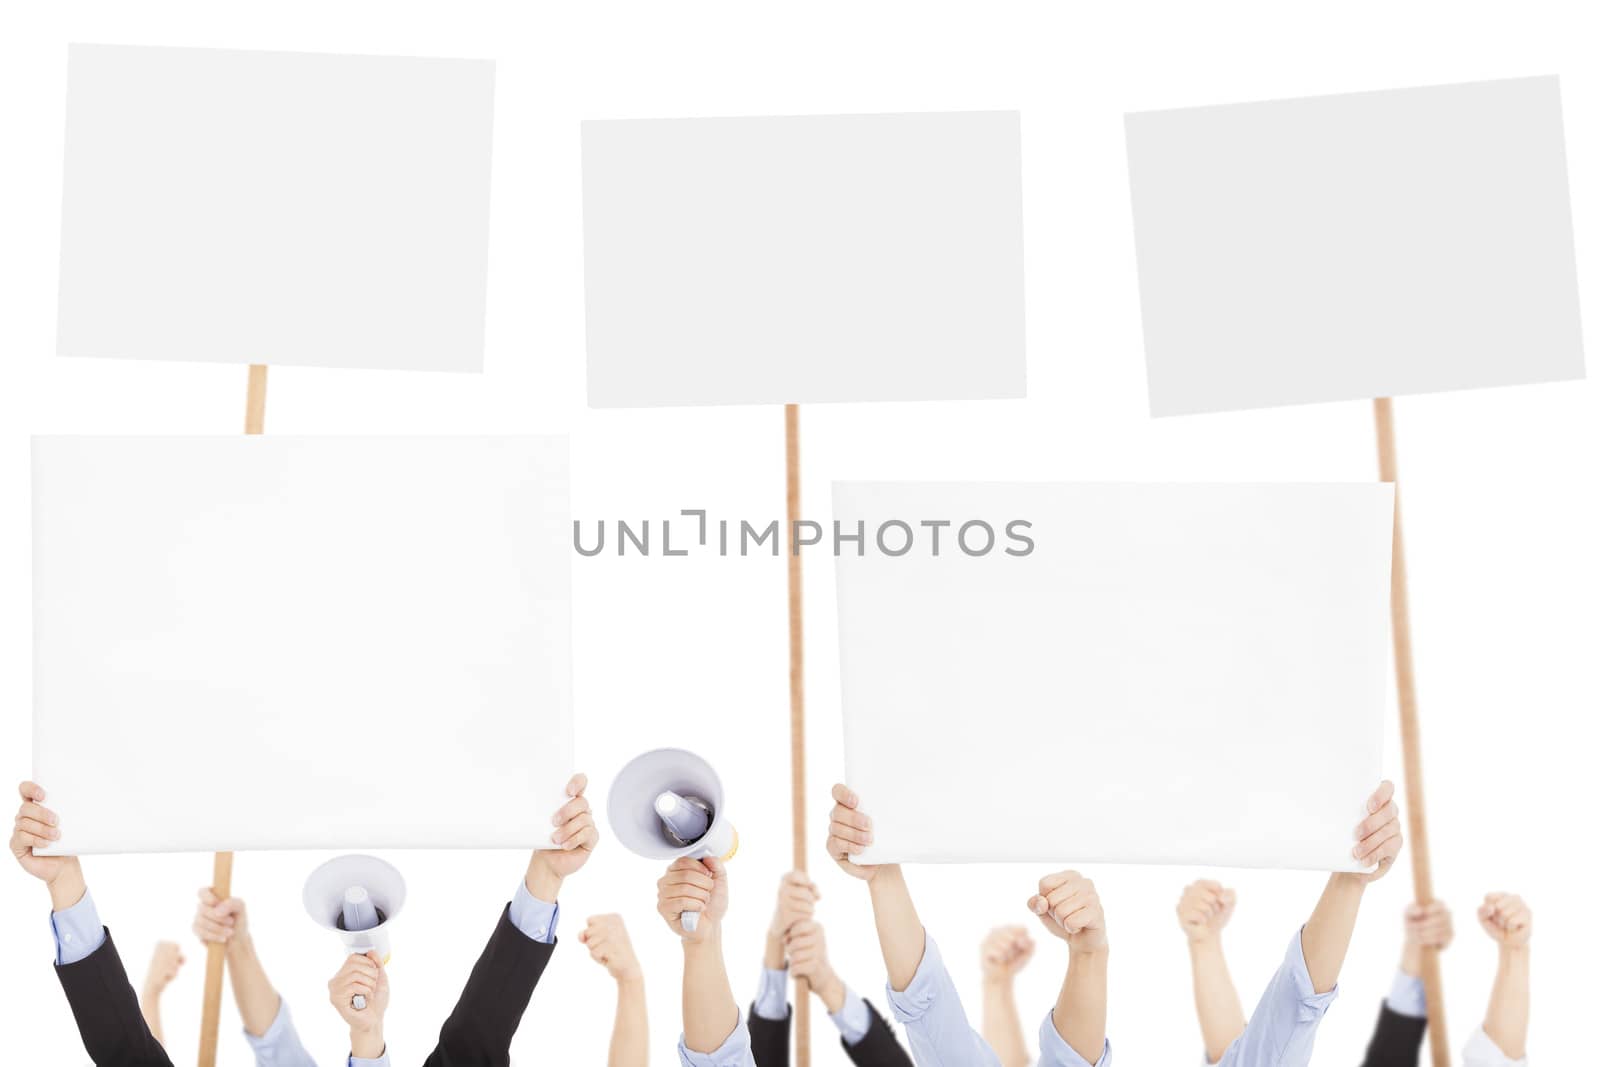 furious people protesting with board and megaphone by tomwang